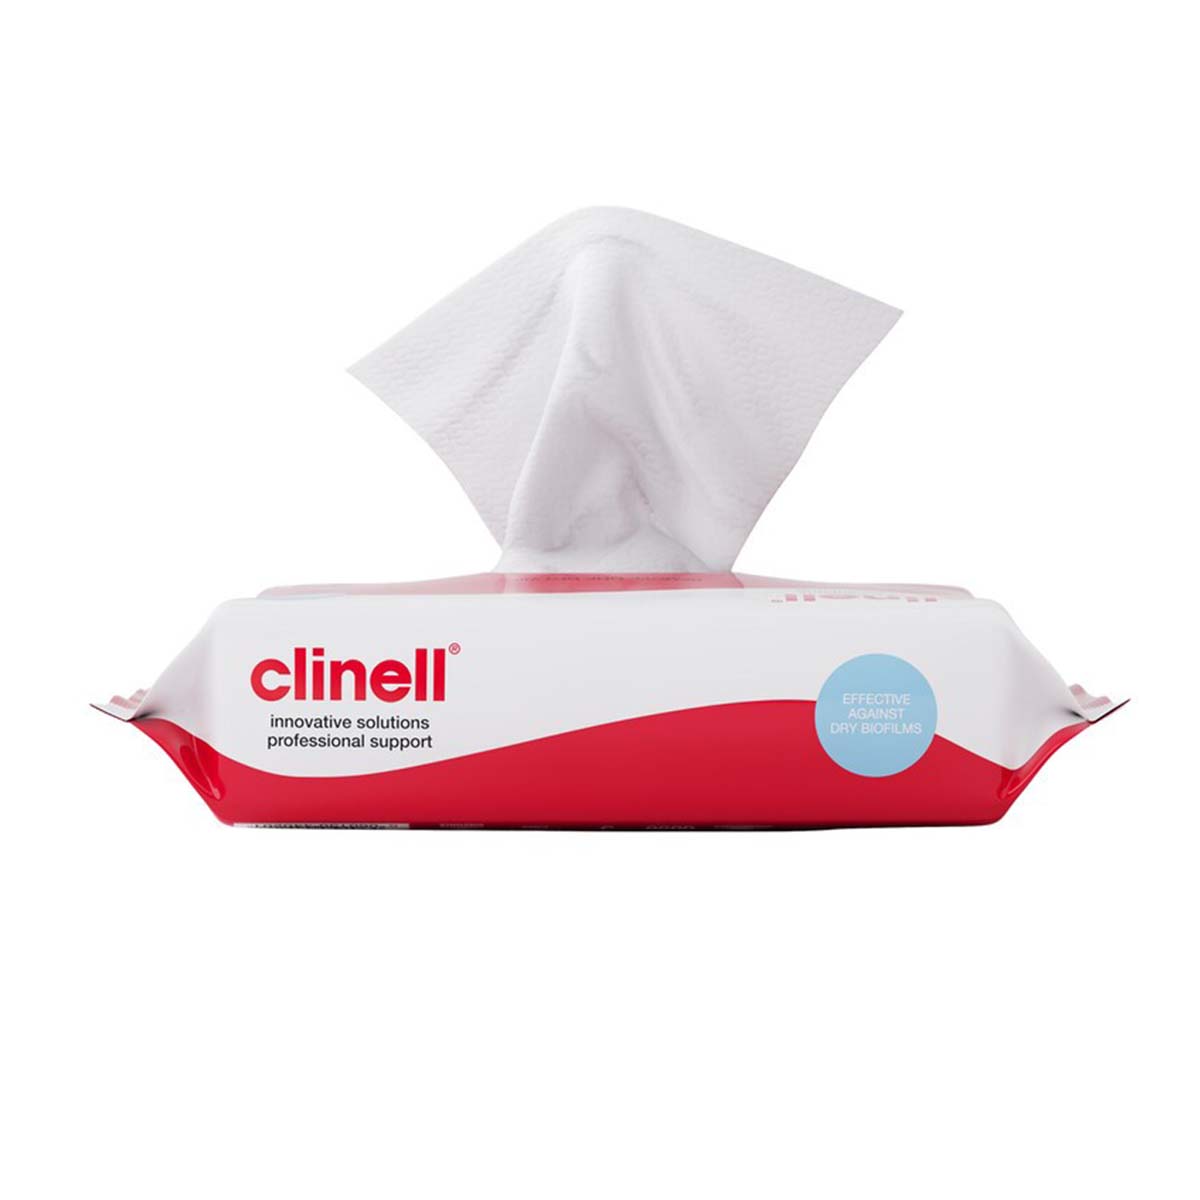 Pack of 25 Clinell® Peracetic Acid Wipes